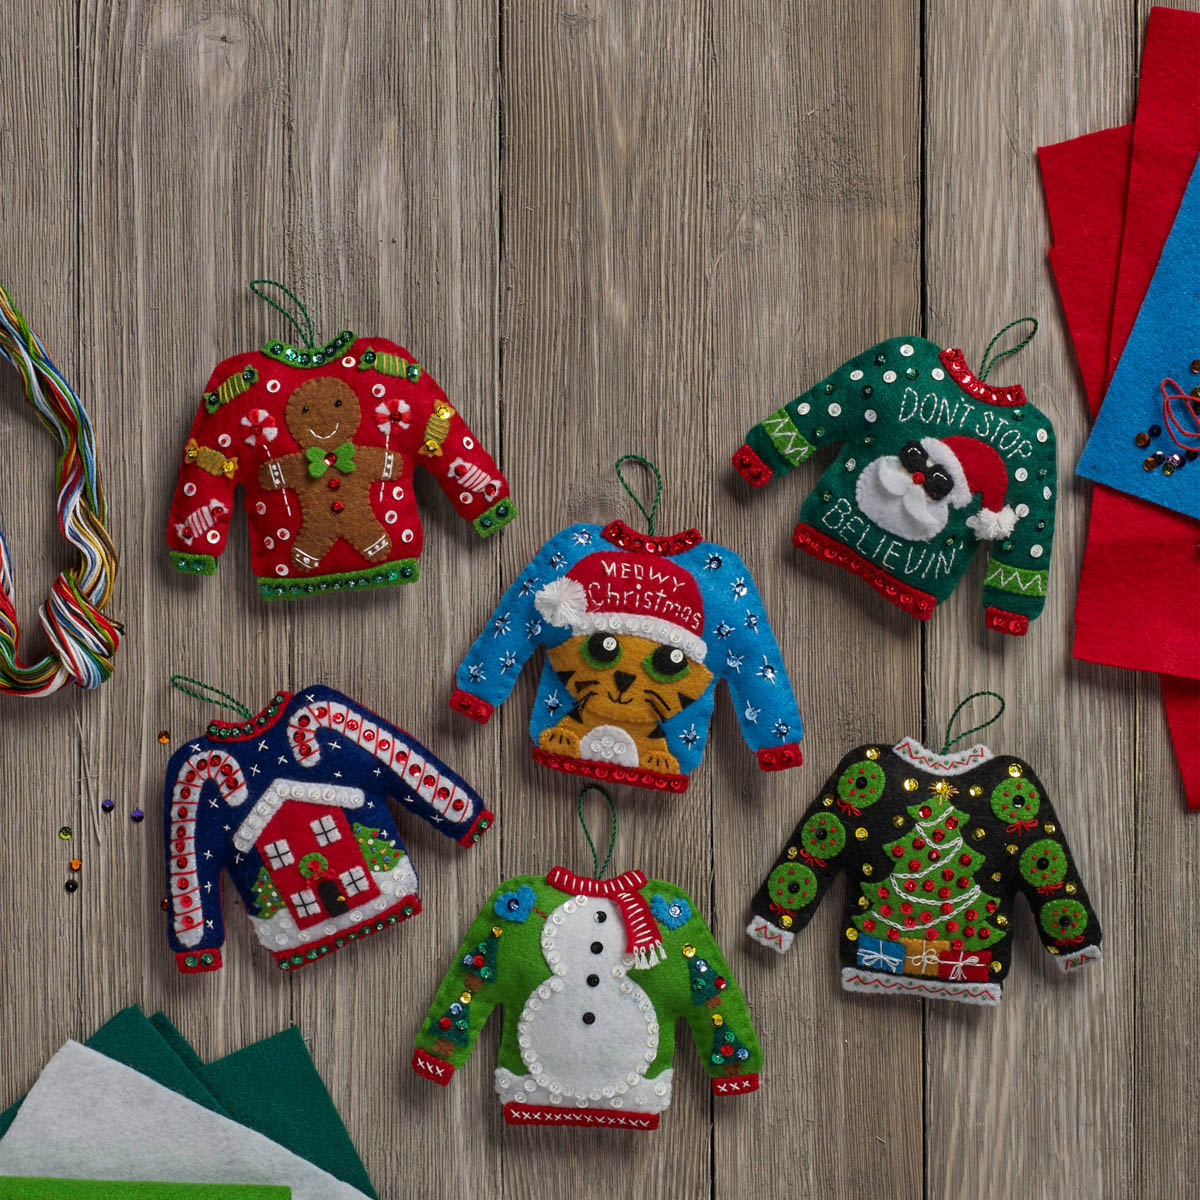 Details about   Christmas Ugly Sweater Ornament Decoration by Holiday Time Free Shiping 